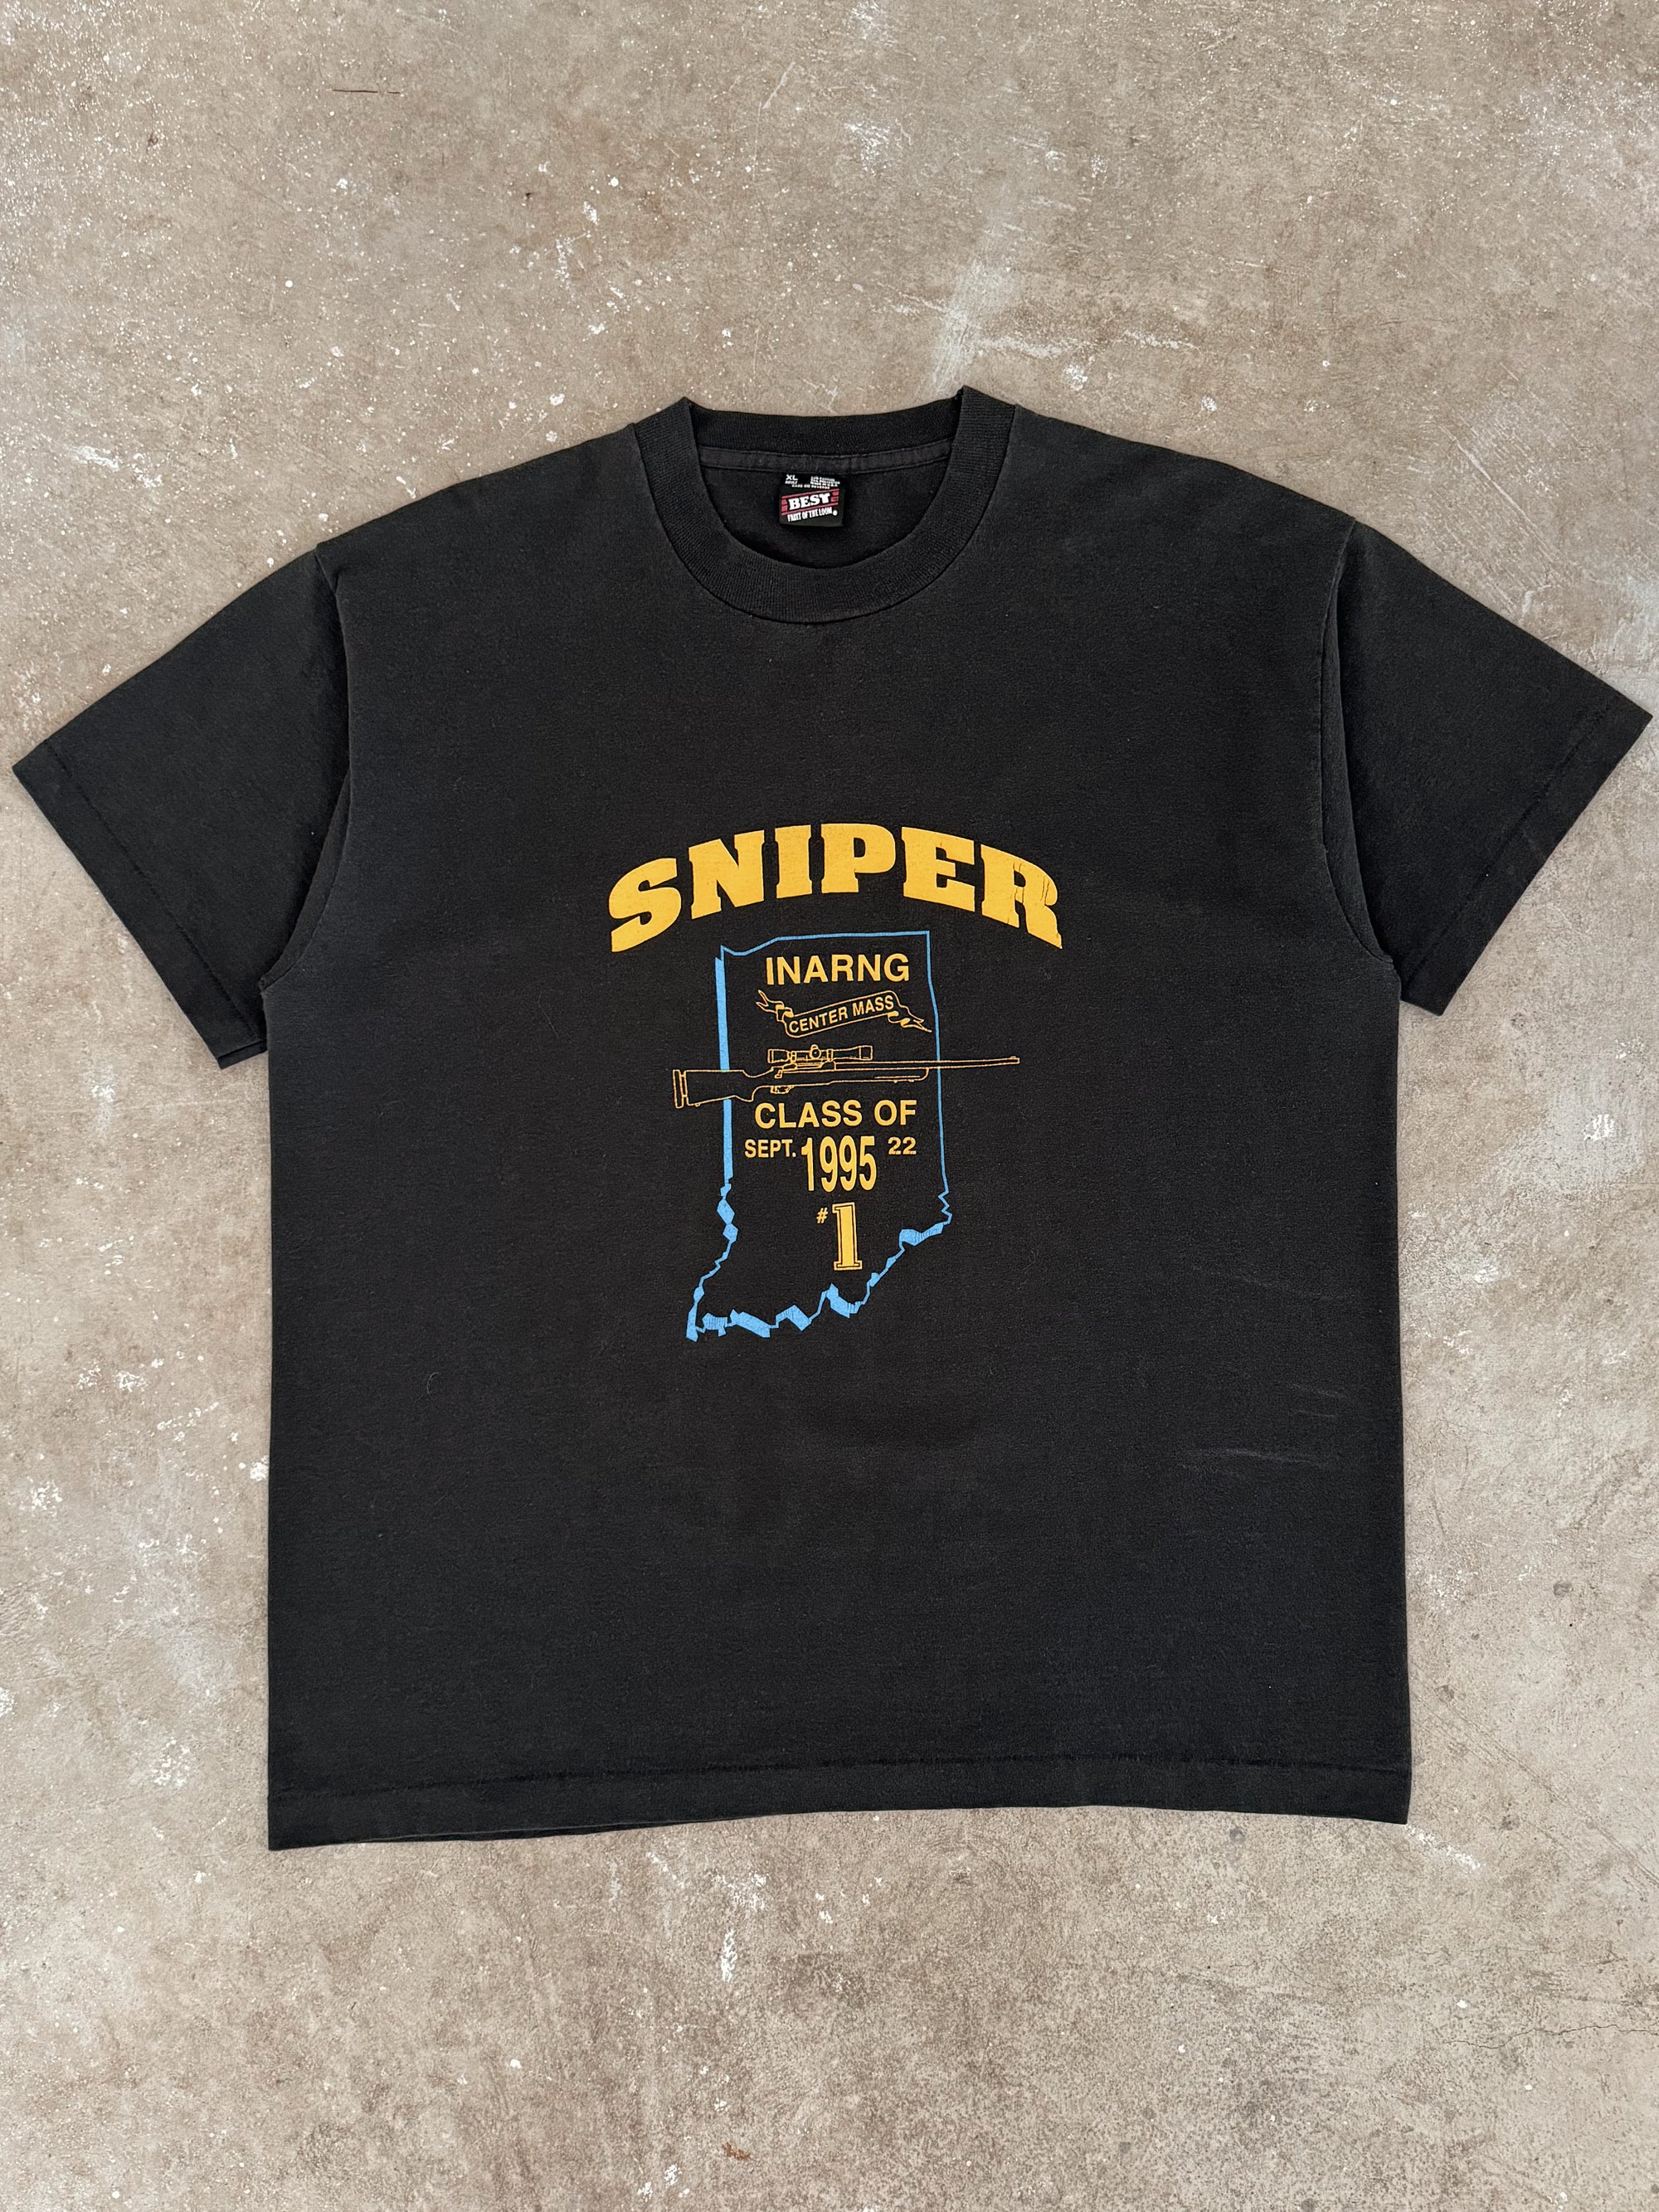 1990s "Sniper Class Inarng" Tee (XL)